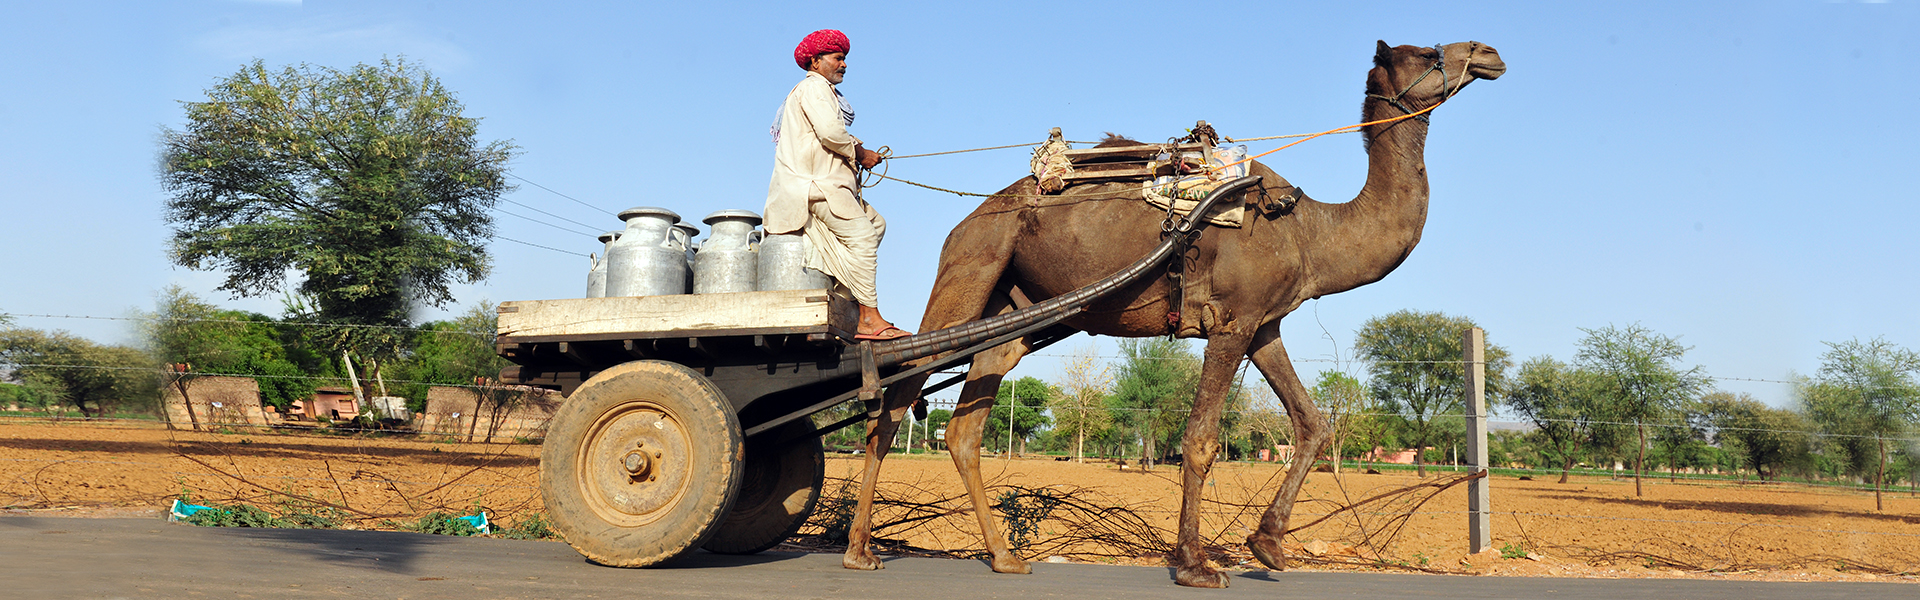 Are Cattle rearers considered as farmers by Govt of India? -